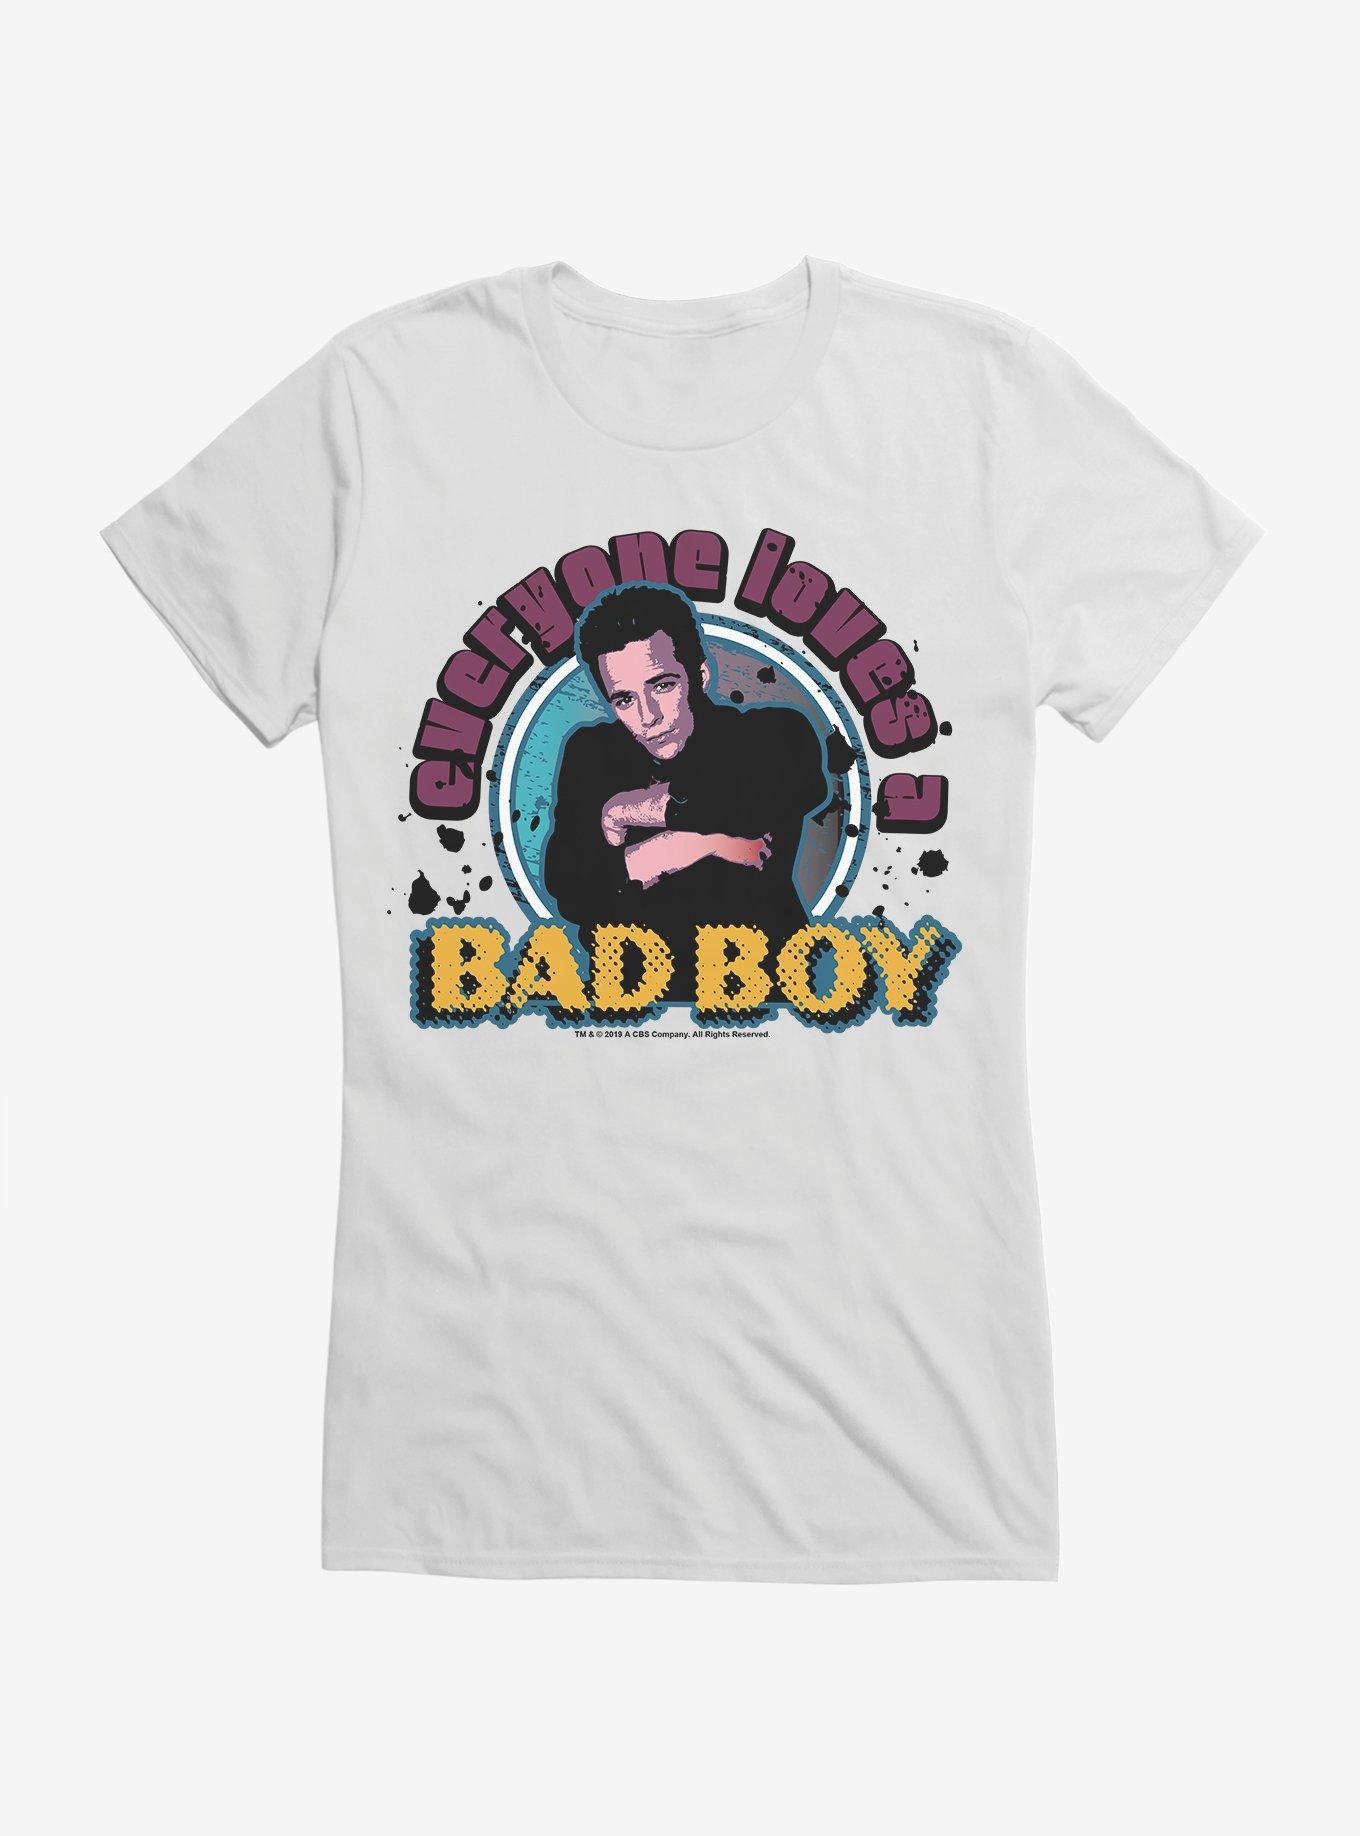 Beverly Hills 90210 Everyone Loves a Bad Boy Dylan Girls T-Shirt, WHITE, hi-res